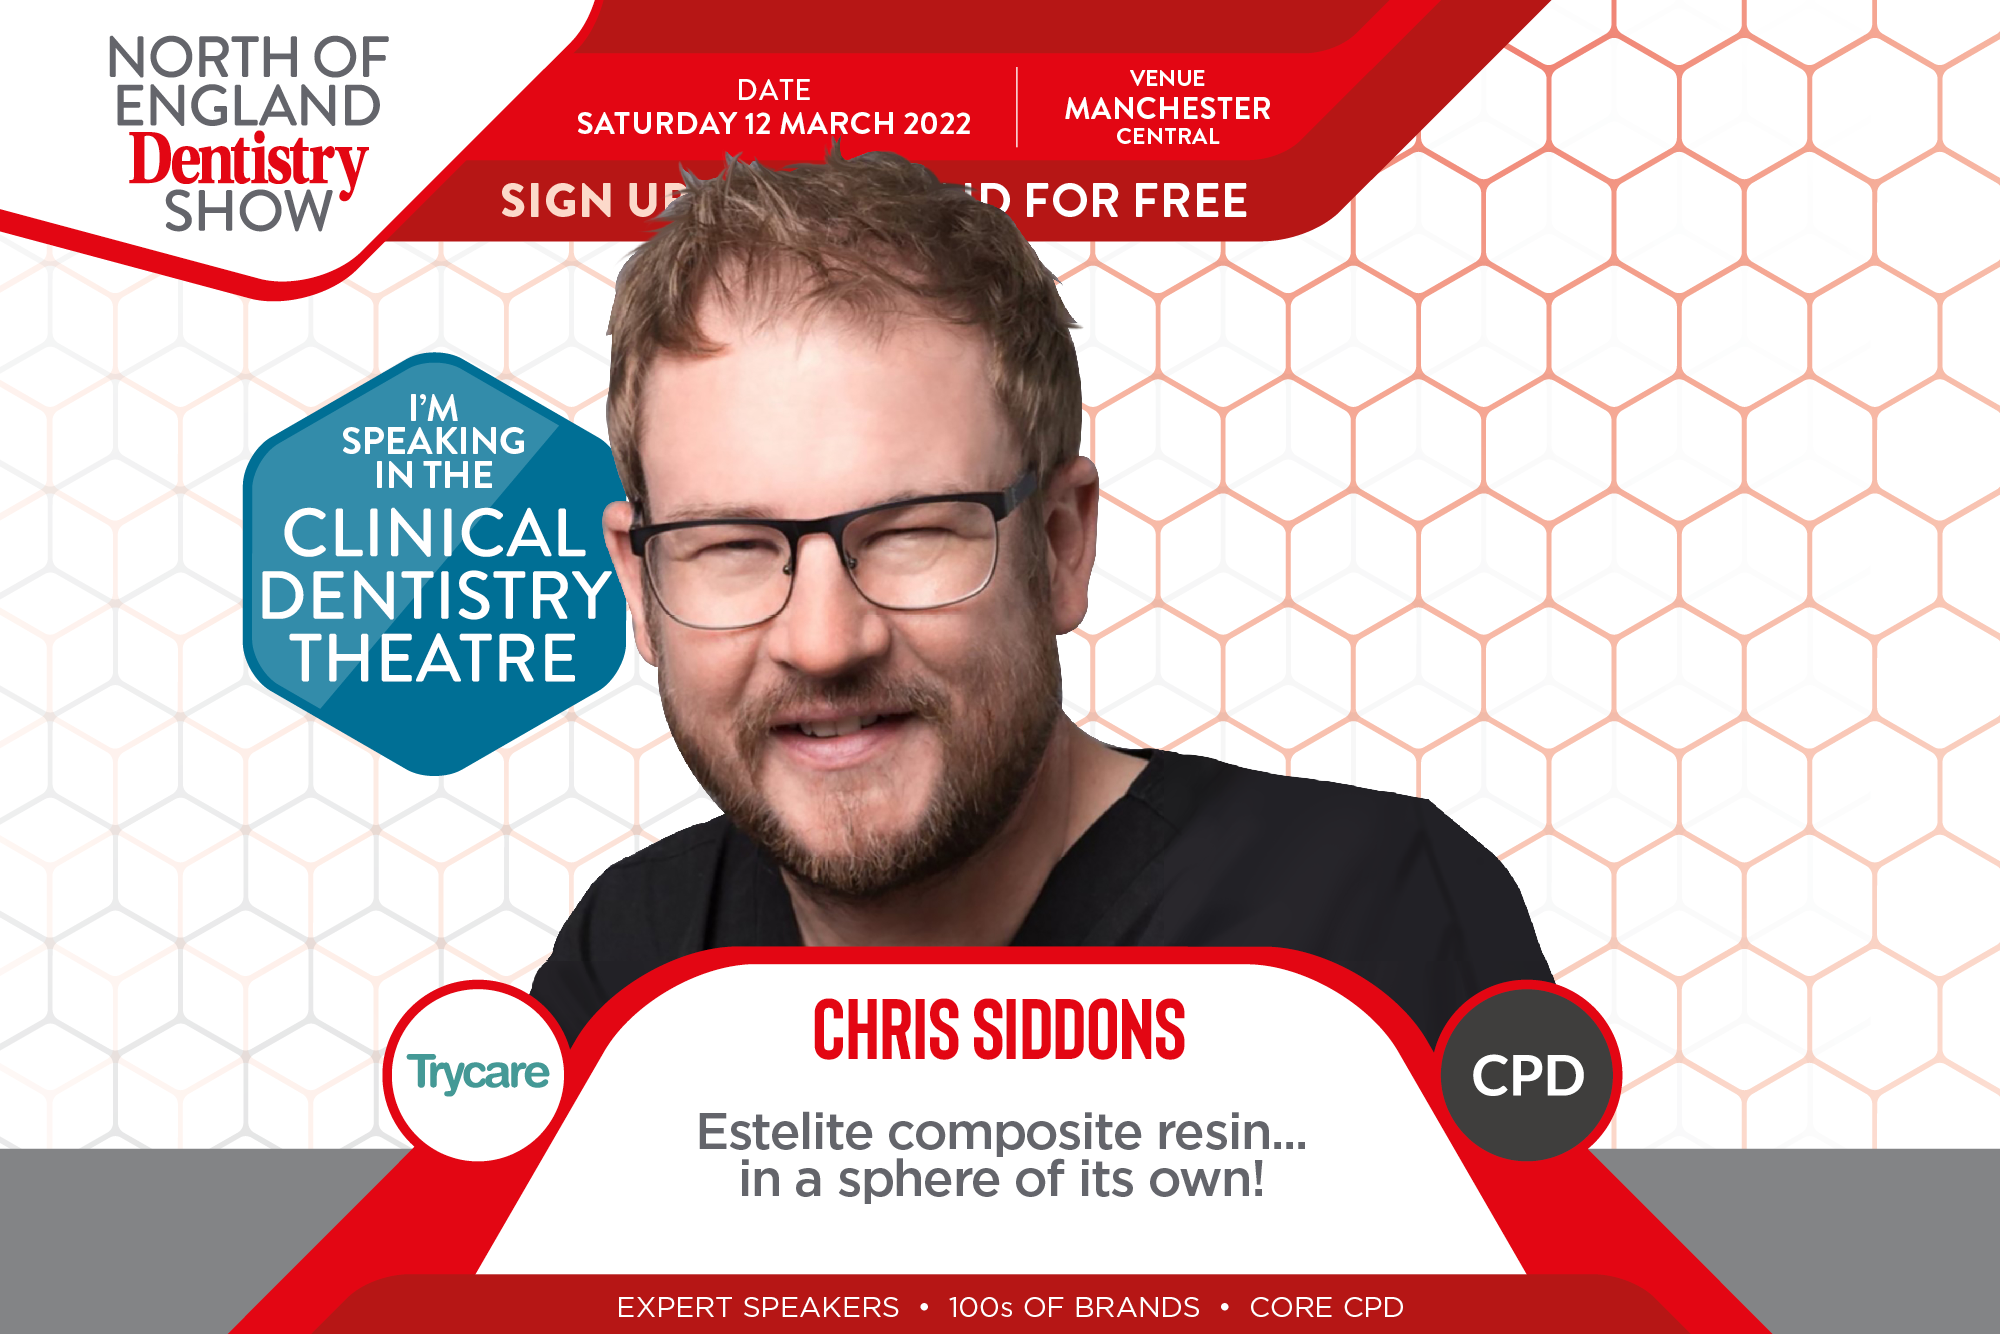 North of England Dentistry Show – Chris Siddons